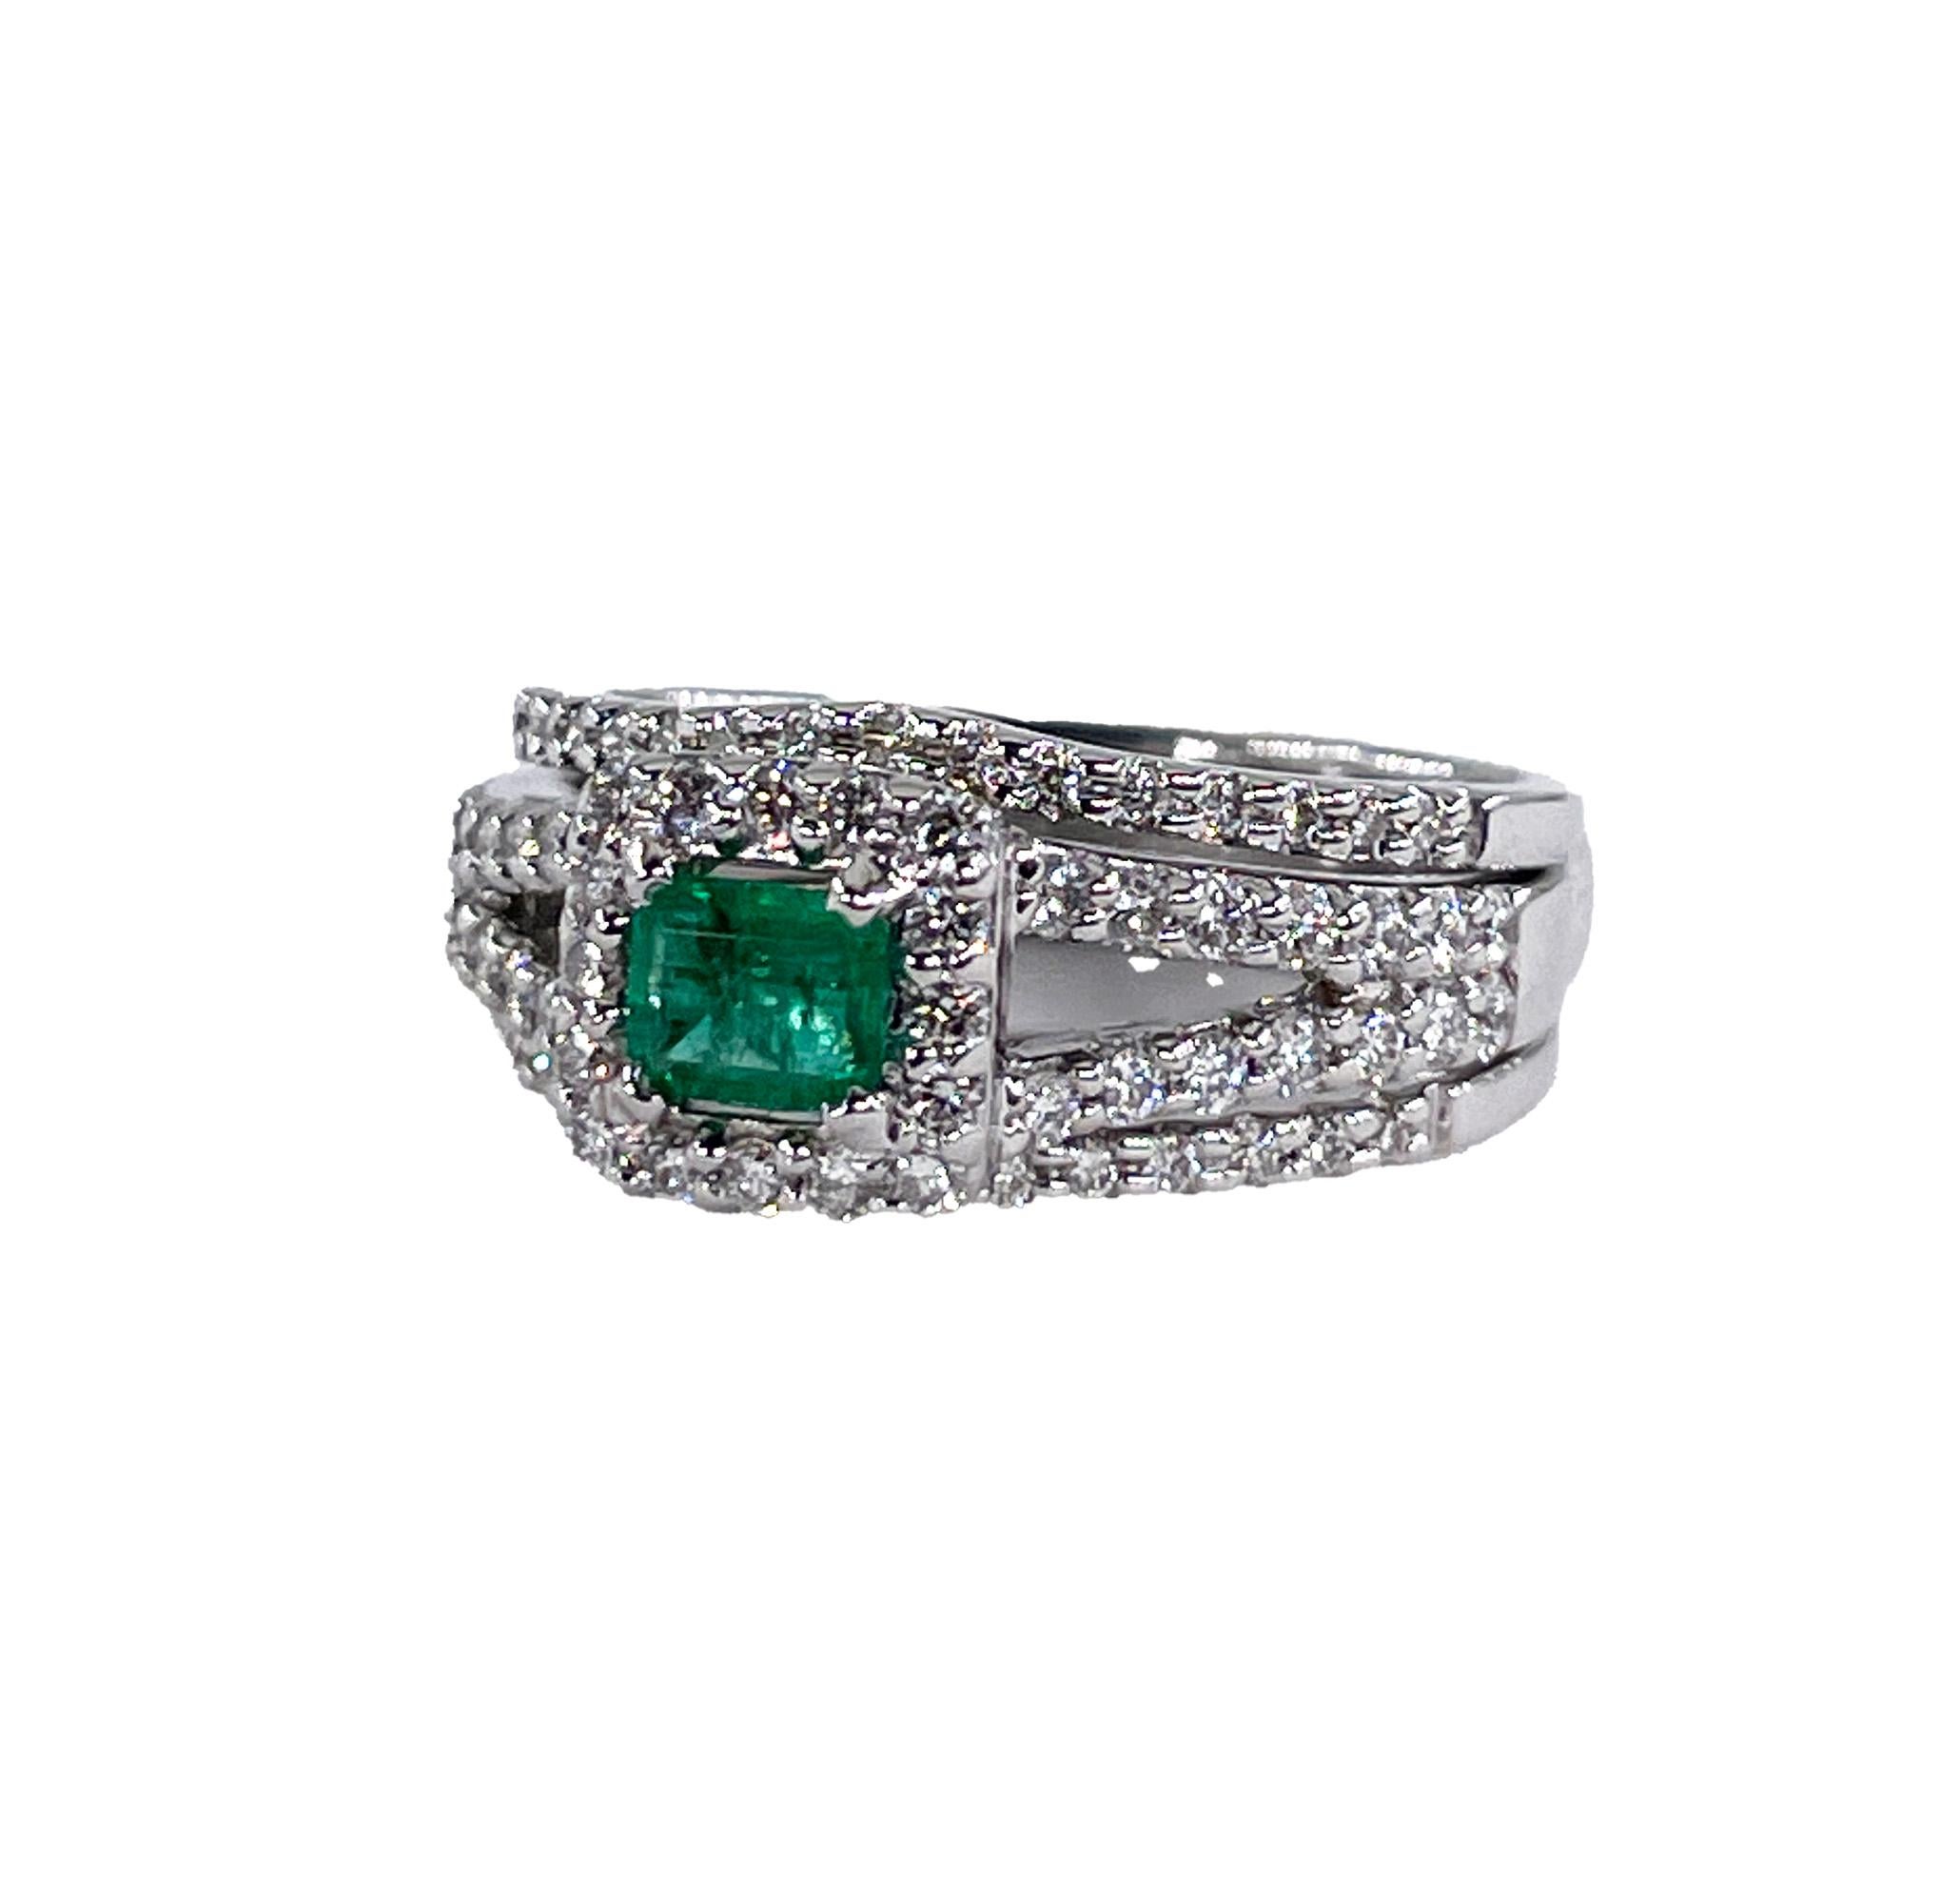 If you are in the market for an engagement ring, promise ring or just an elegant everyday sparkler with the touch of color- this ring would make a stunningly classic presentation!
This chic and dynamic, elegantly sculpted Fabulous Vintage Estate